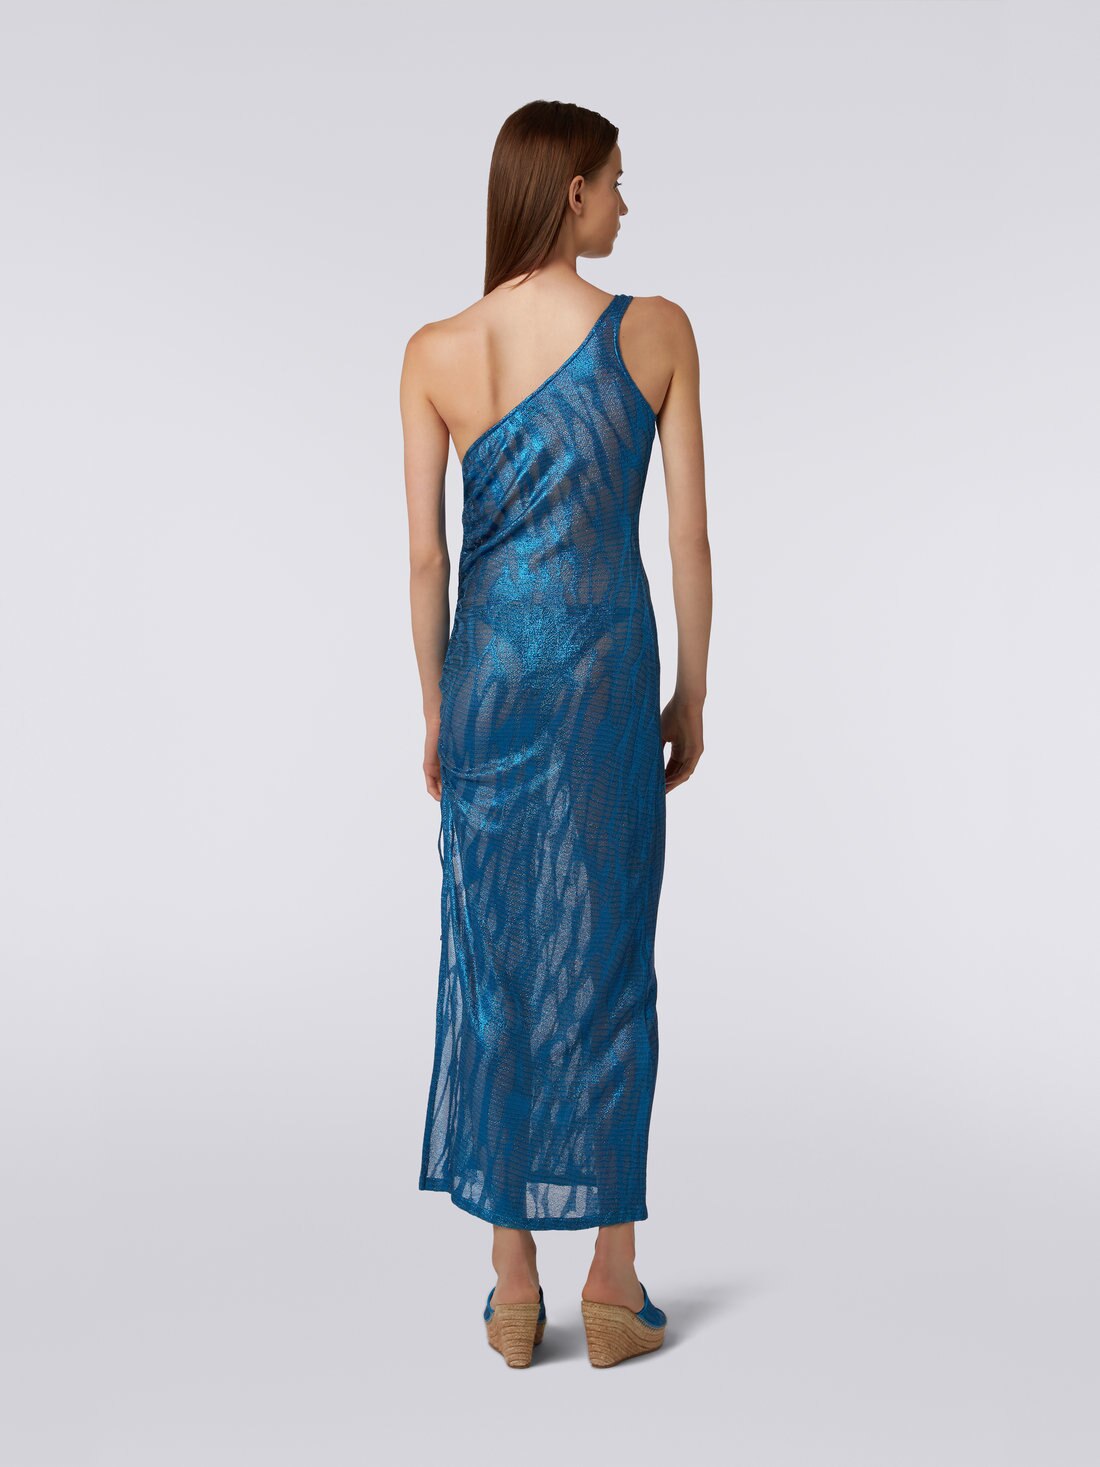 Long one-shoulder cover up in jacquard viscose knit, Blue - MS23WQ02BT006OS72D0 - 3